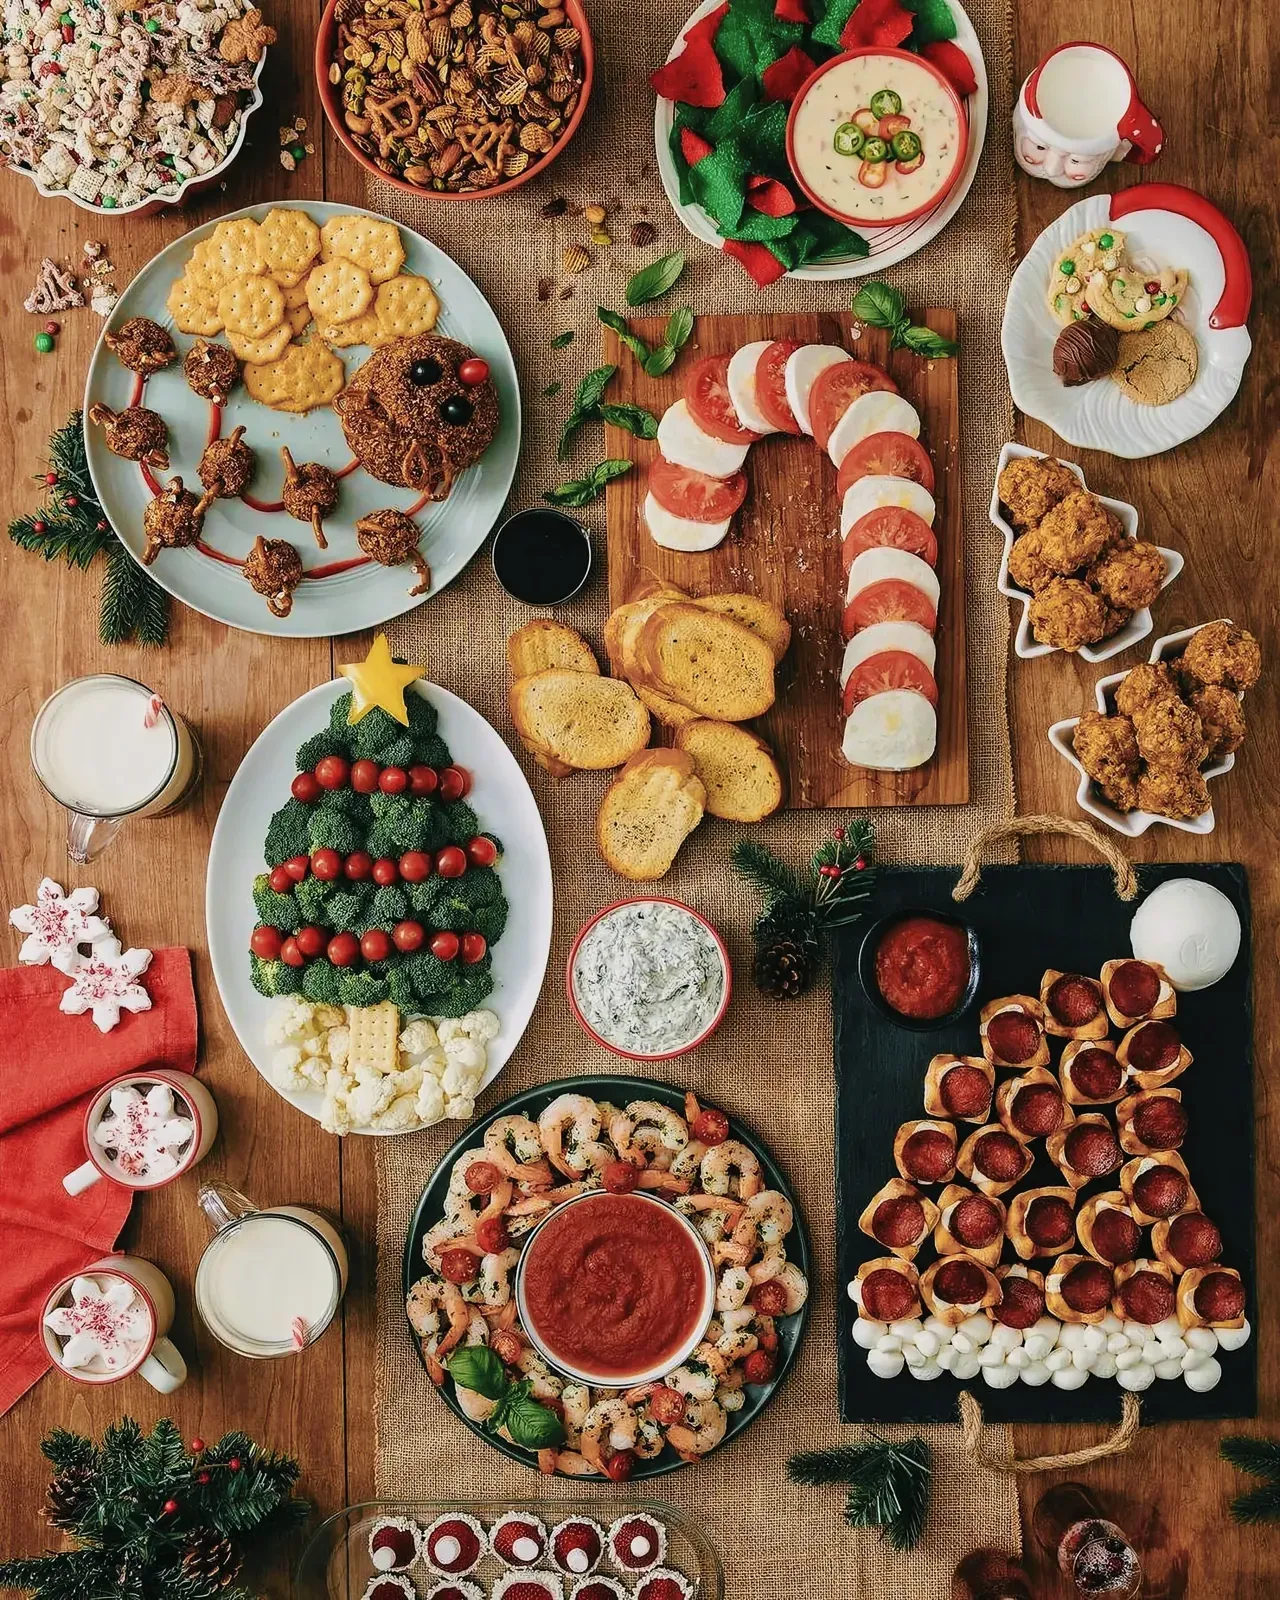 A festive spread of Christmas finger foods including shrimp cocktail, pizza, mixed nuts, and more.